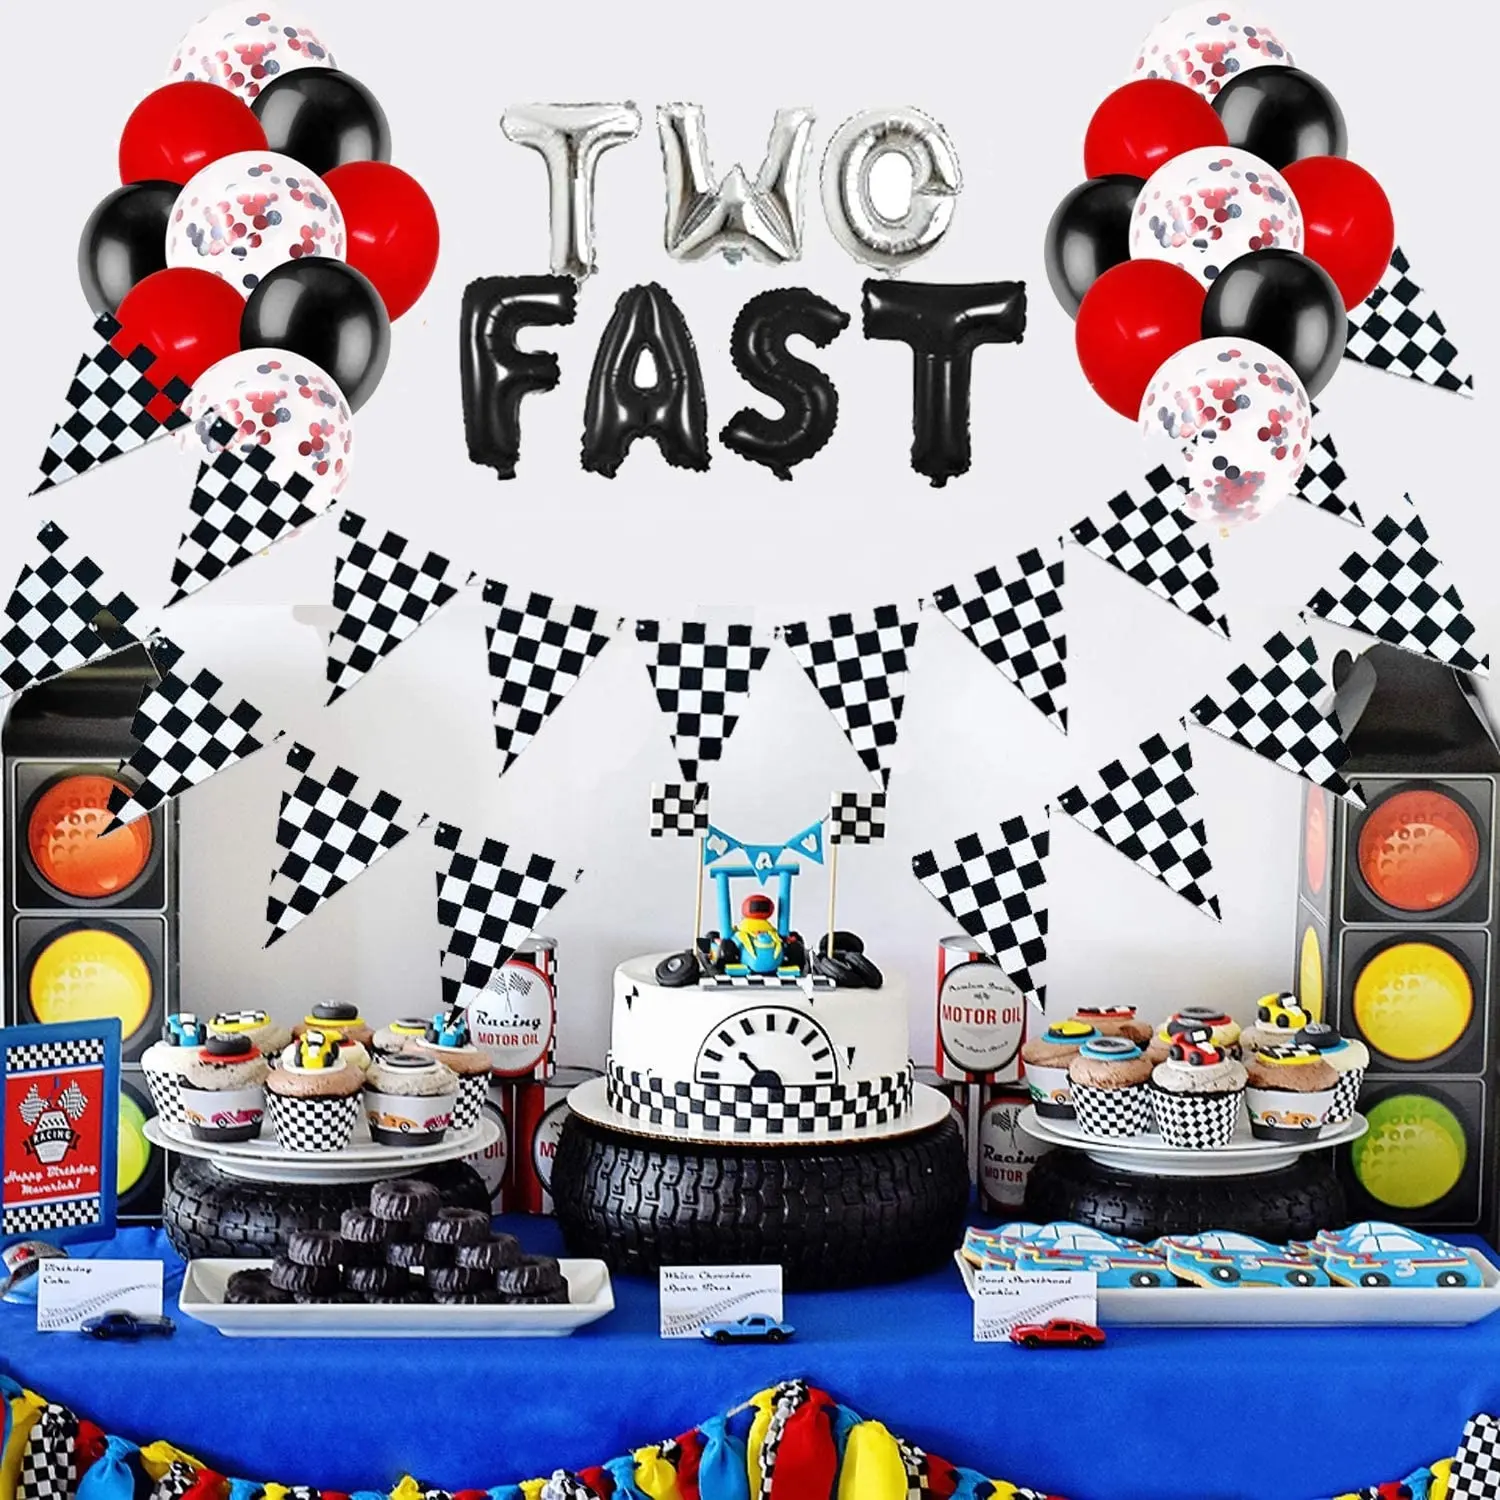 Pafu Race Car Party Supplies Two Fast Birthday Decorations For Boy 2nd Second Birthday Let's Go Racing Birthday Decorations Kit